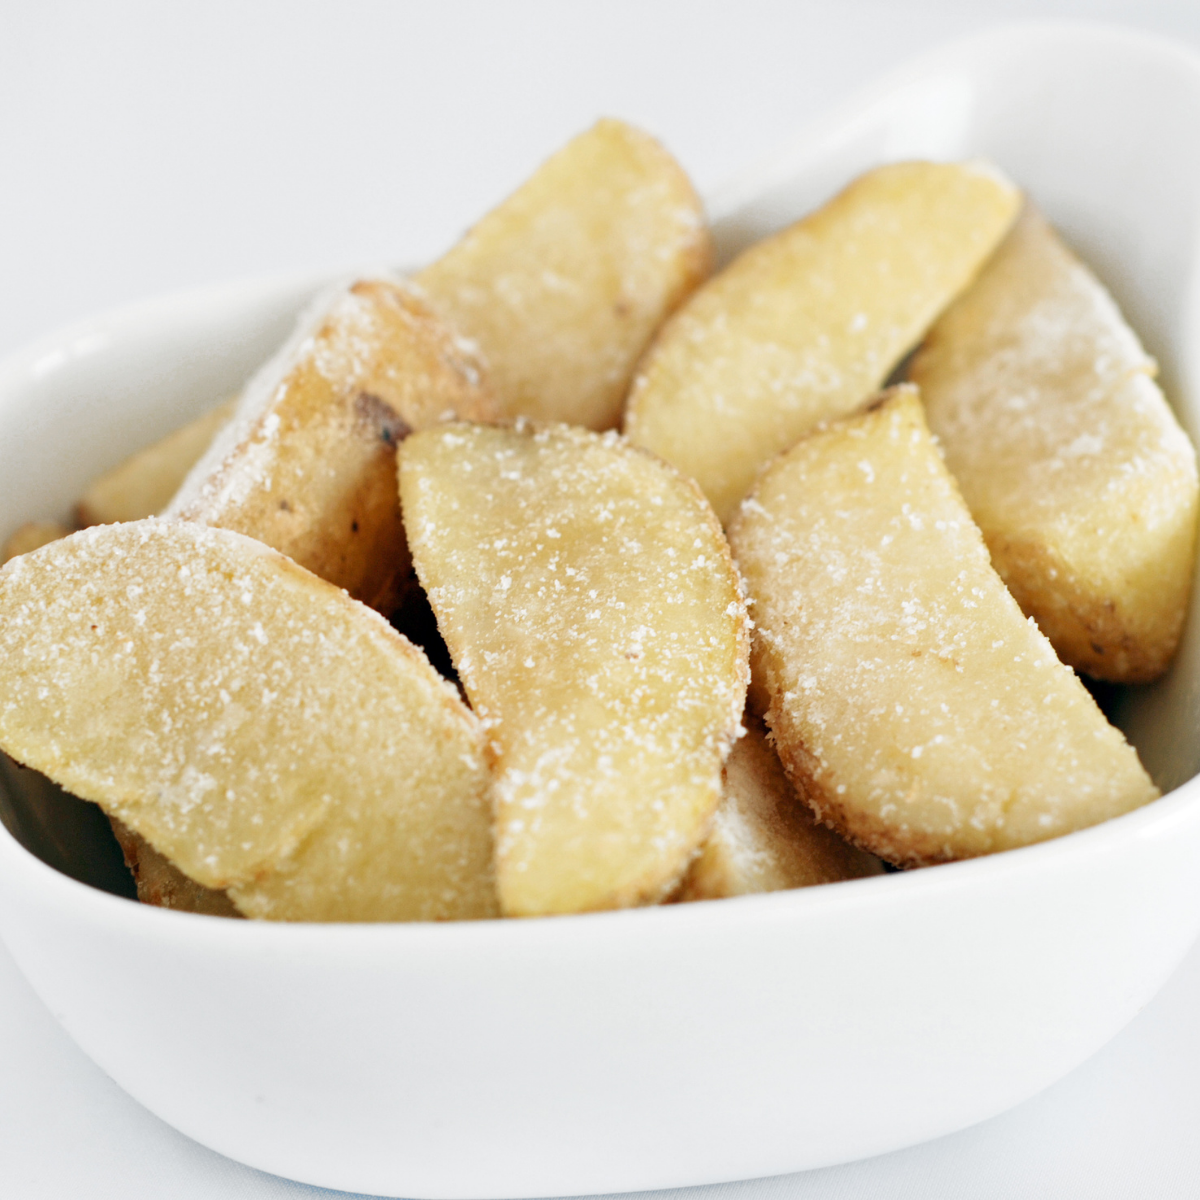 Magnihill's Potato wedges pre-fried with skin KRAV'